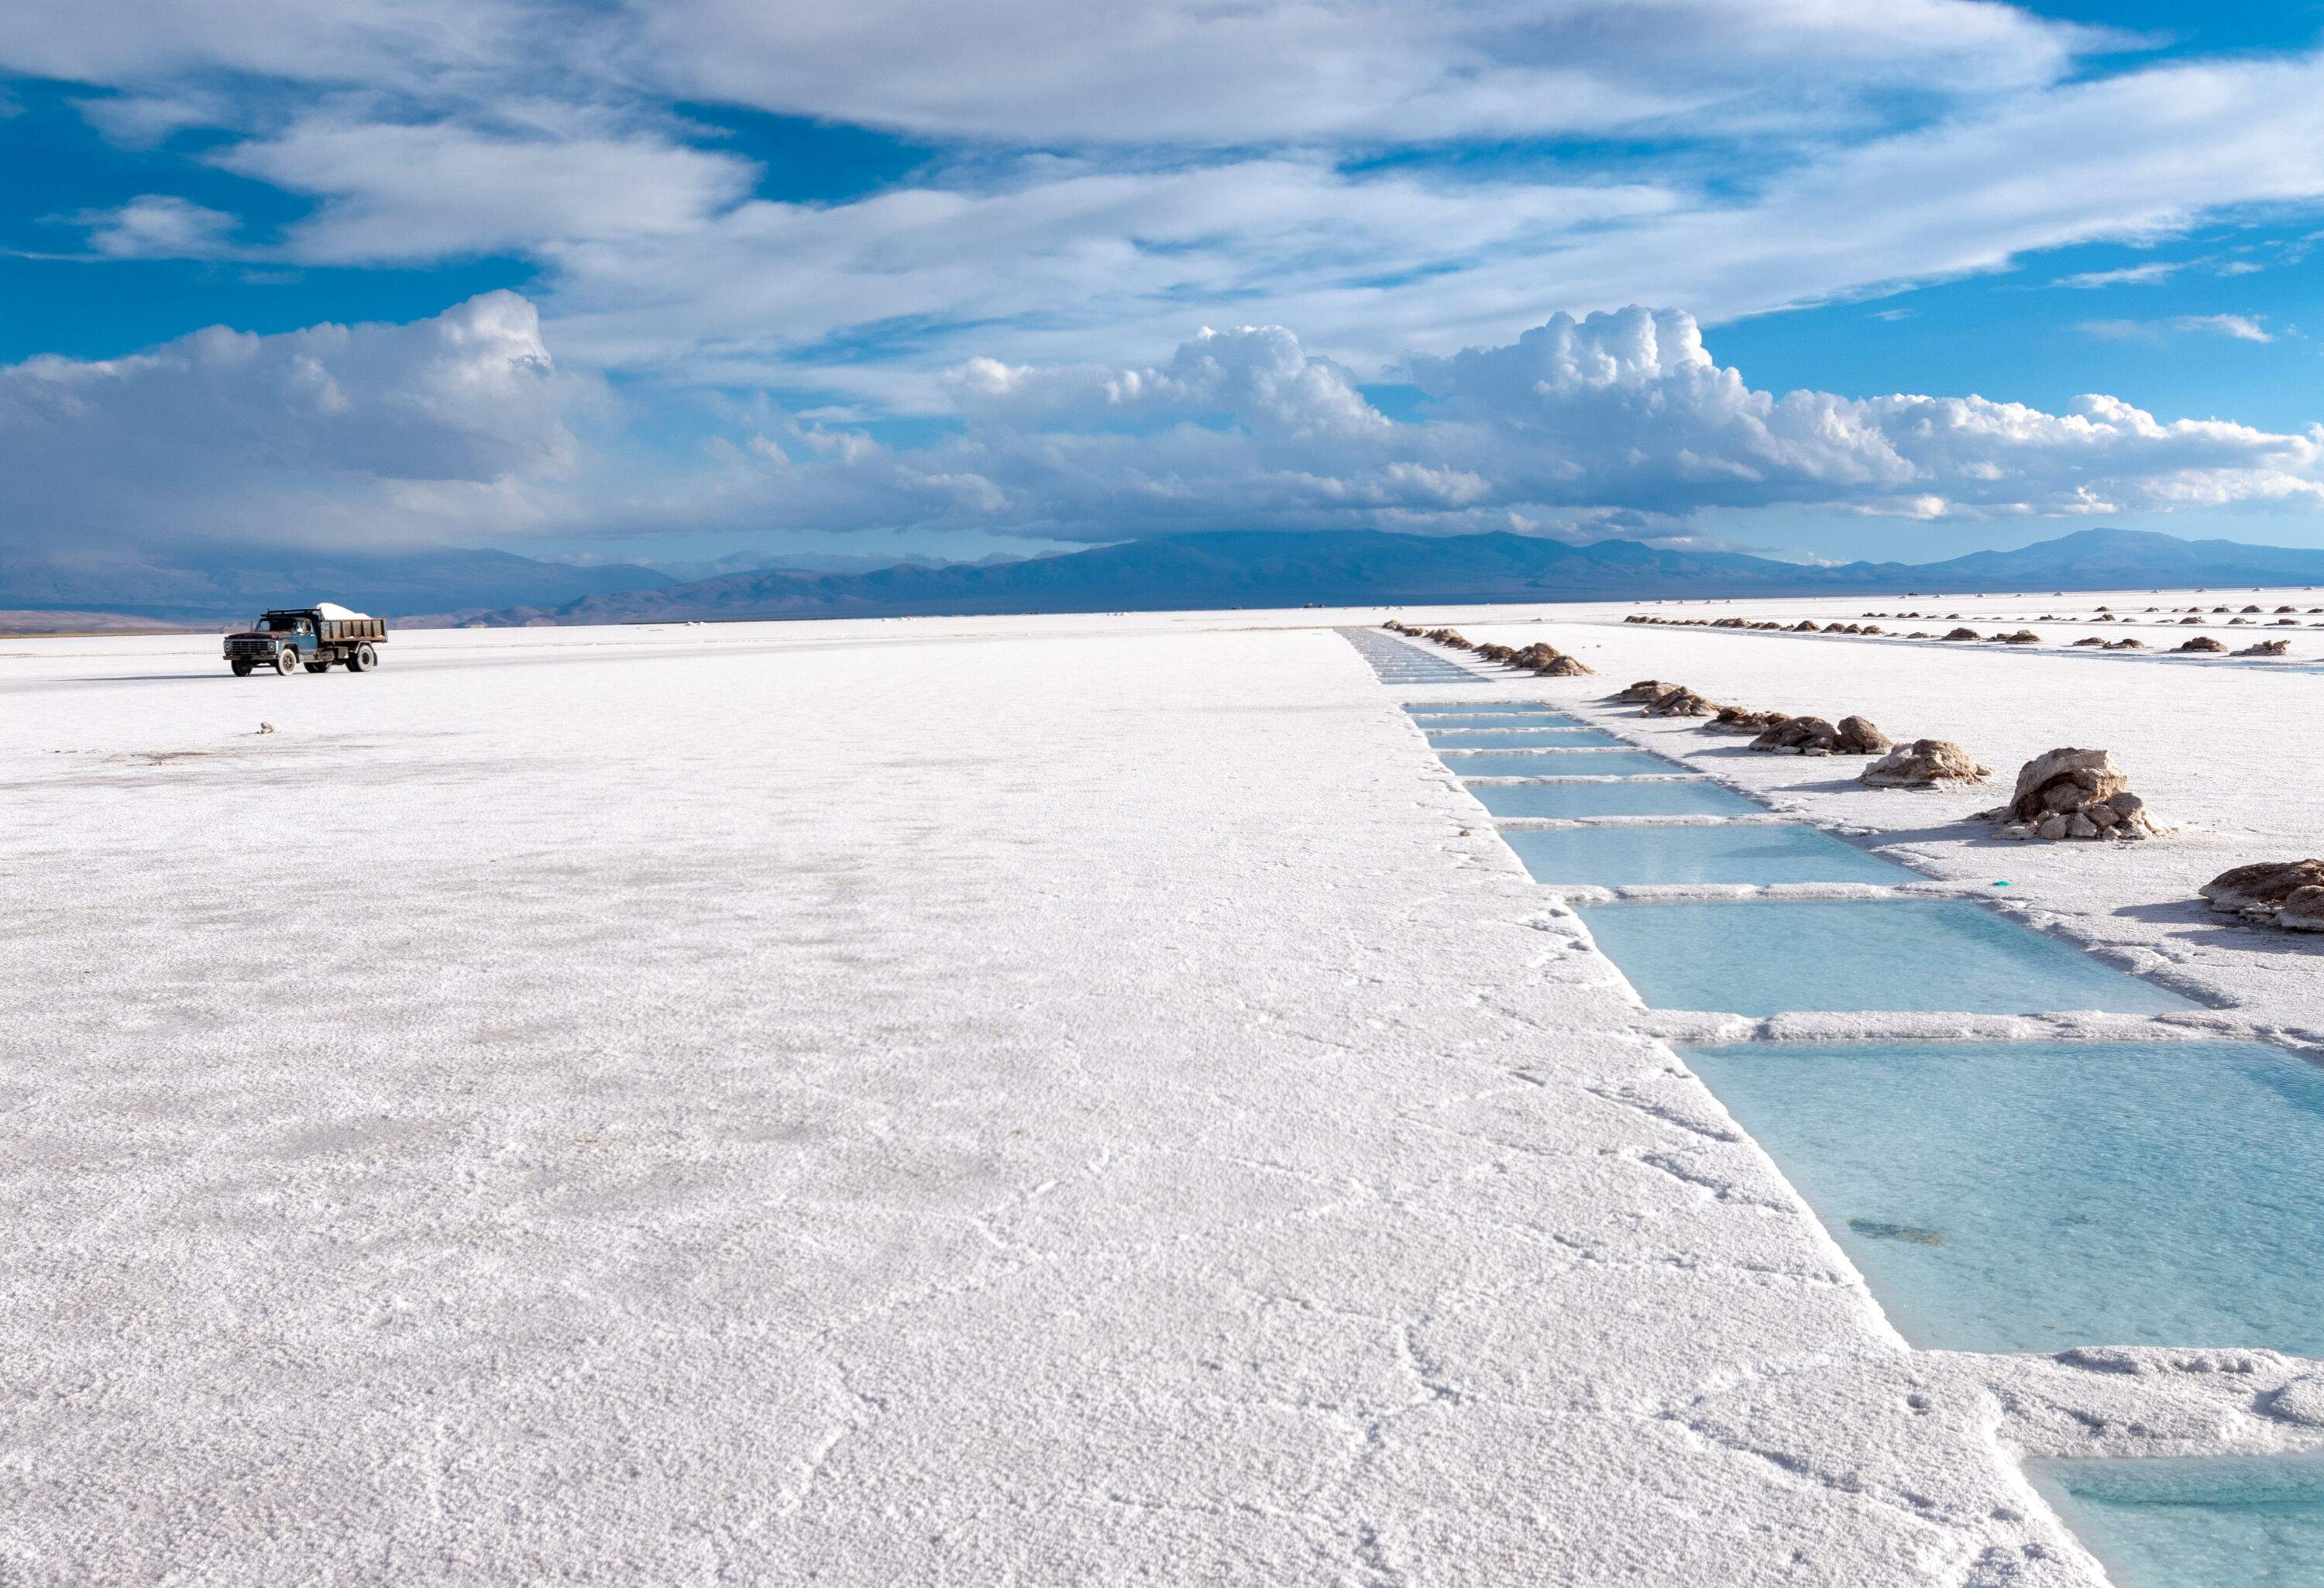 Salt extraction pools create a unique white landscape, with a truck filled with salt travelling in the background.